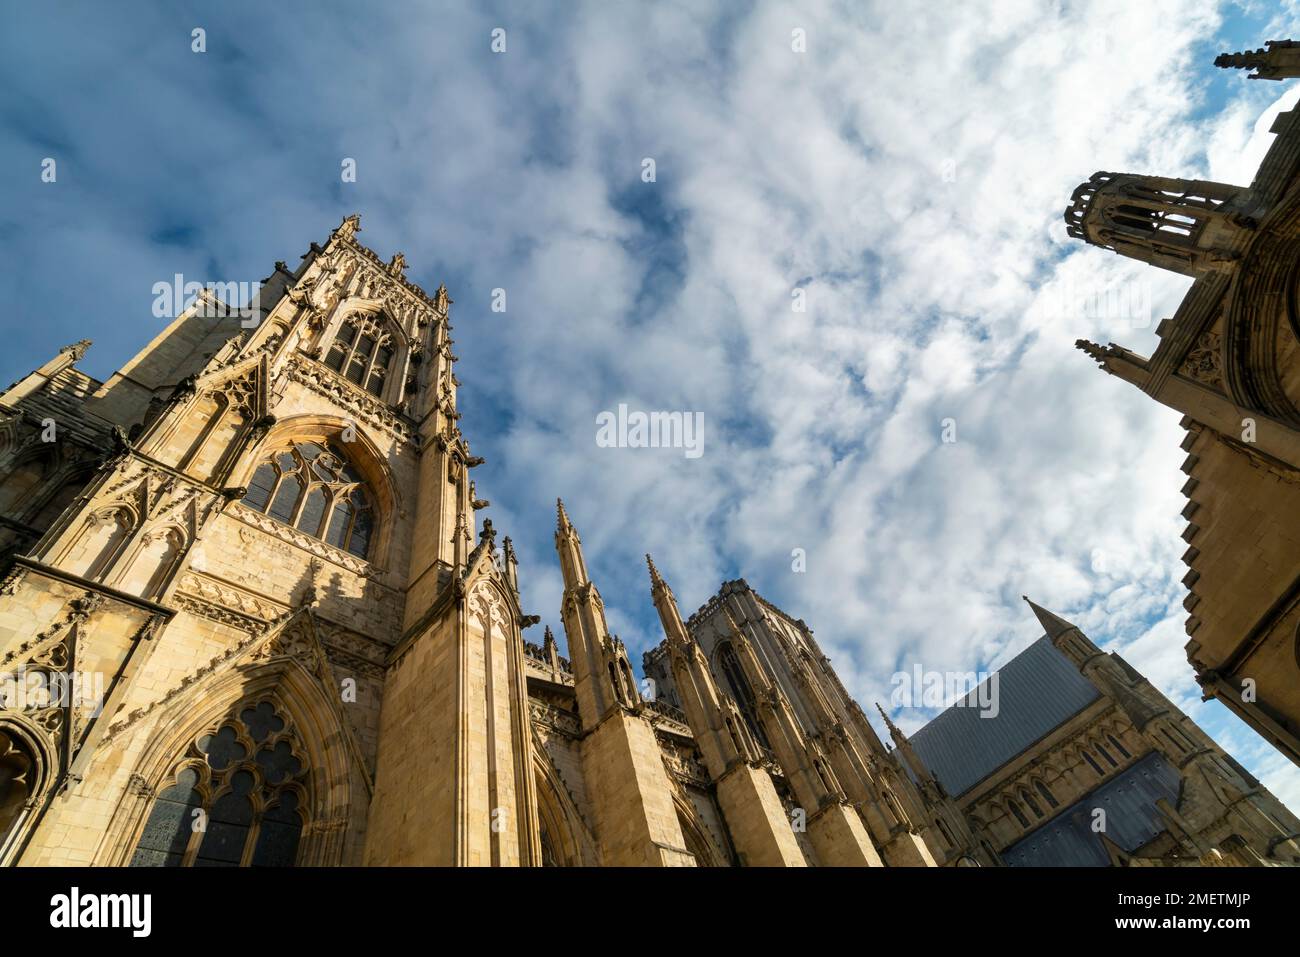 York Minster or the Cathedral and Metropolitical Church of Saint Peter in York, York, Yorkshire, England Stock Photo